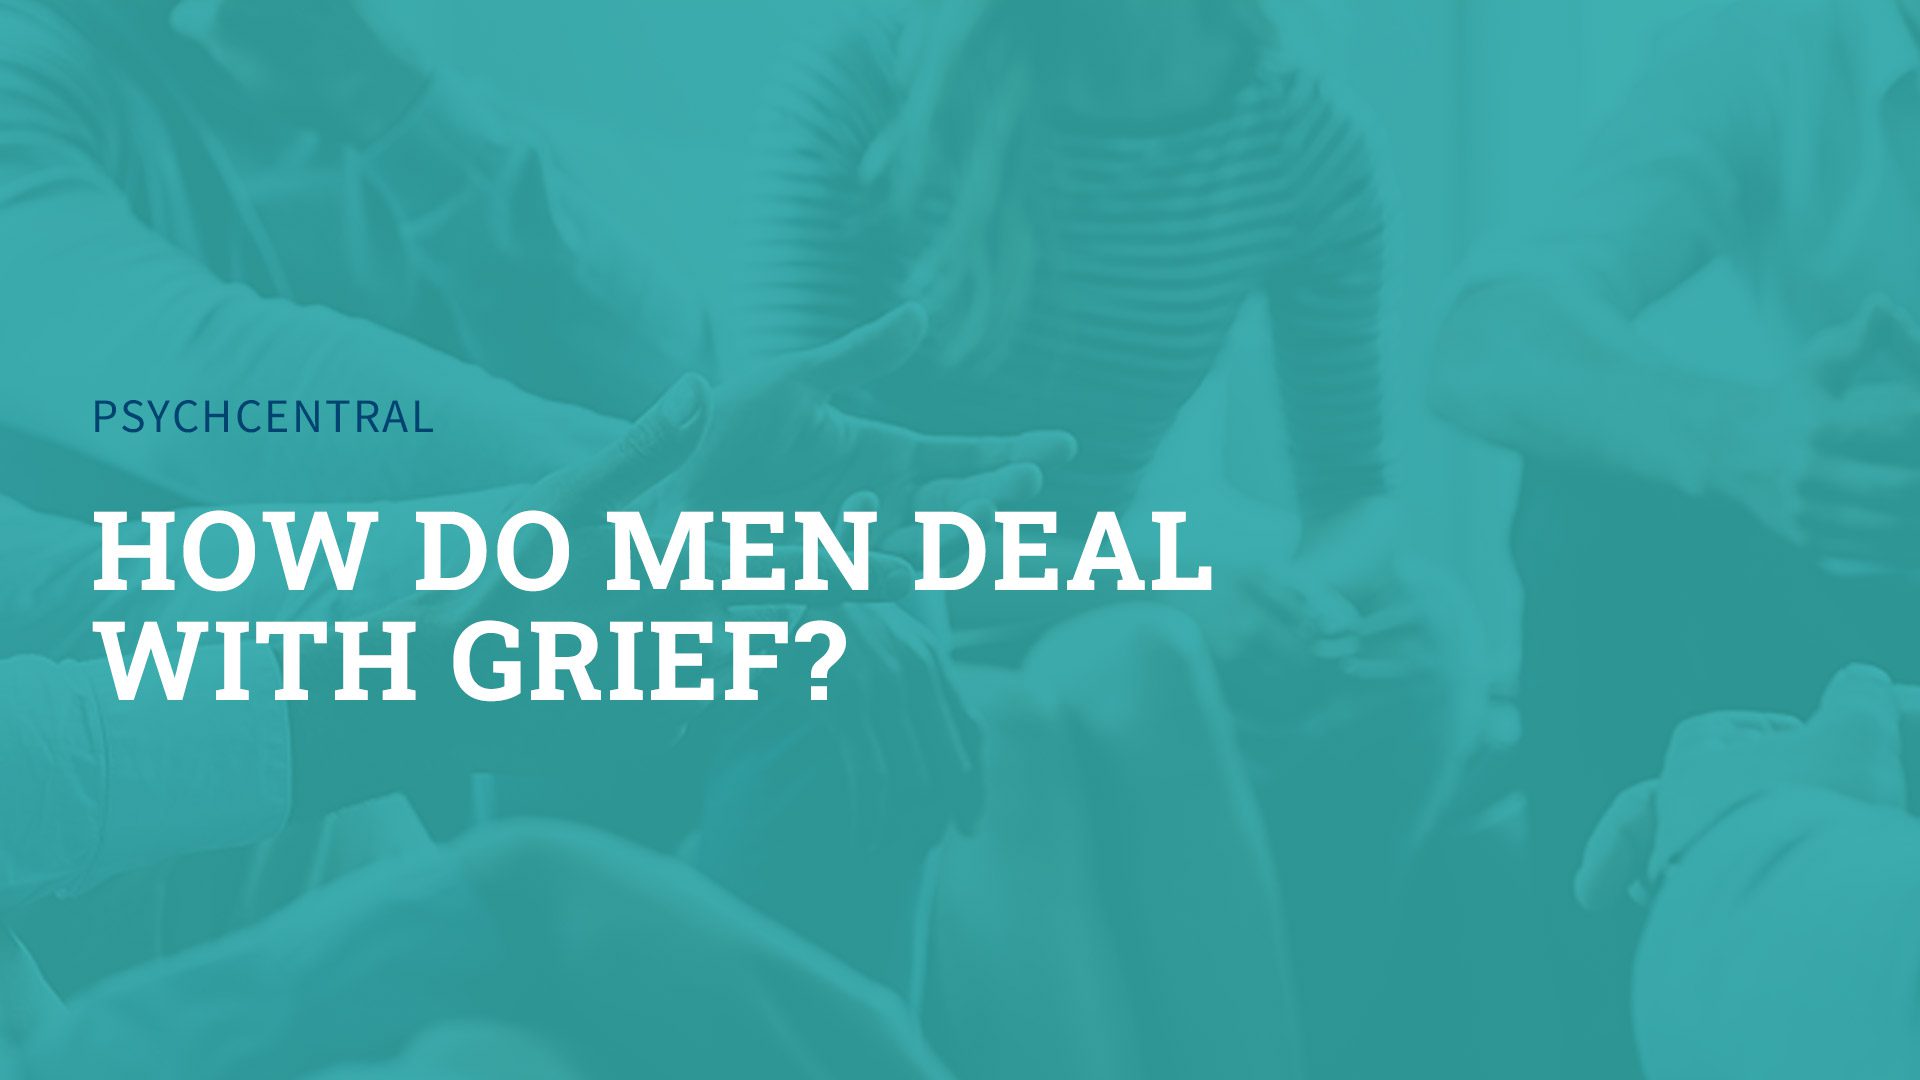 How Do Men Deal with Grief?